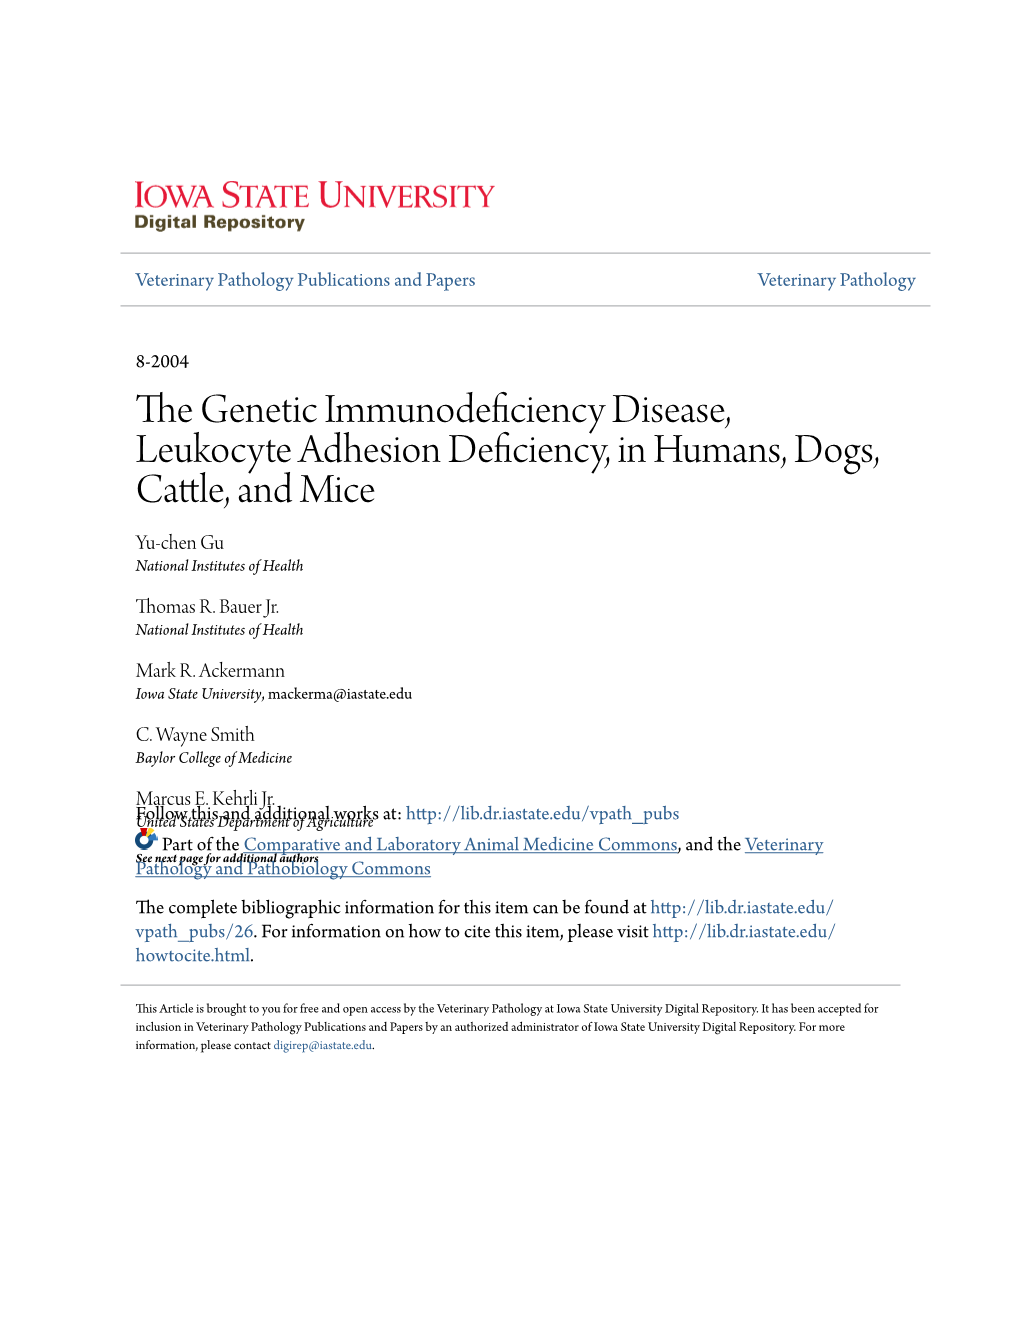 The Genetic Immunodeficiency Disease, Leukocyte Adhesion Deficiency, in Humans, Dogs, Cattle, and Mice Yu-Chen Gu National Institutes of Health